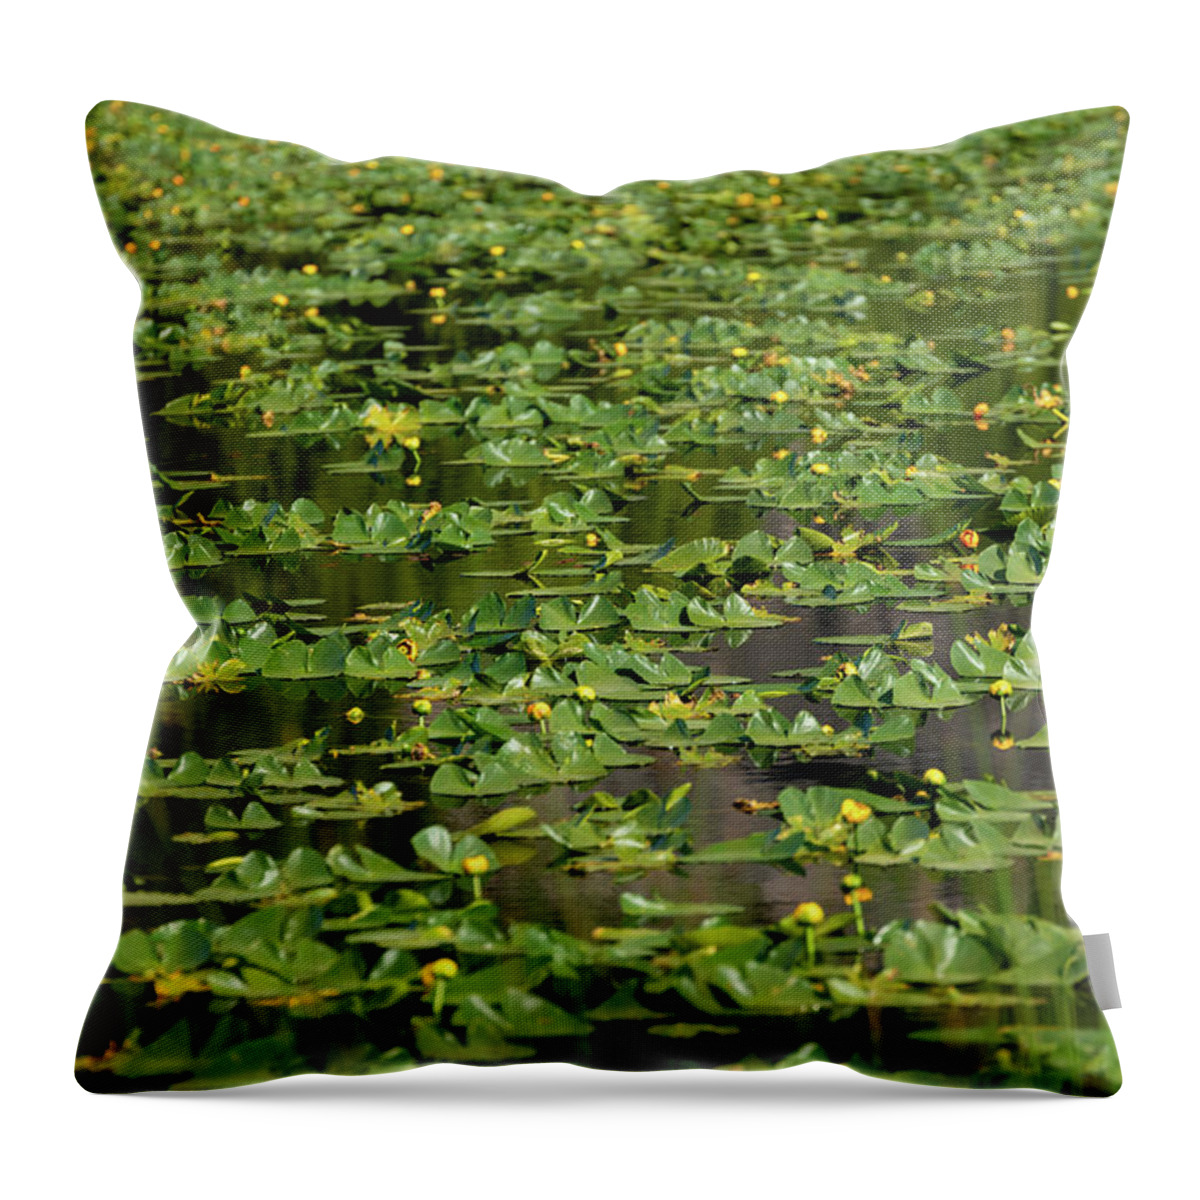 Yellowstone Throw Pillow featuring the photograph Harlequin Lake Lily Pads by Tara Krauss